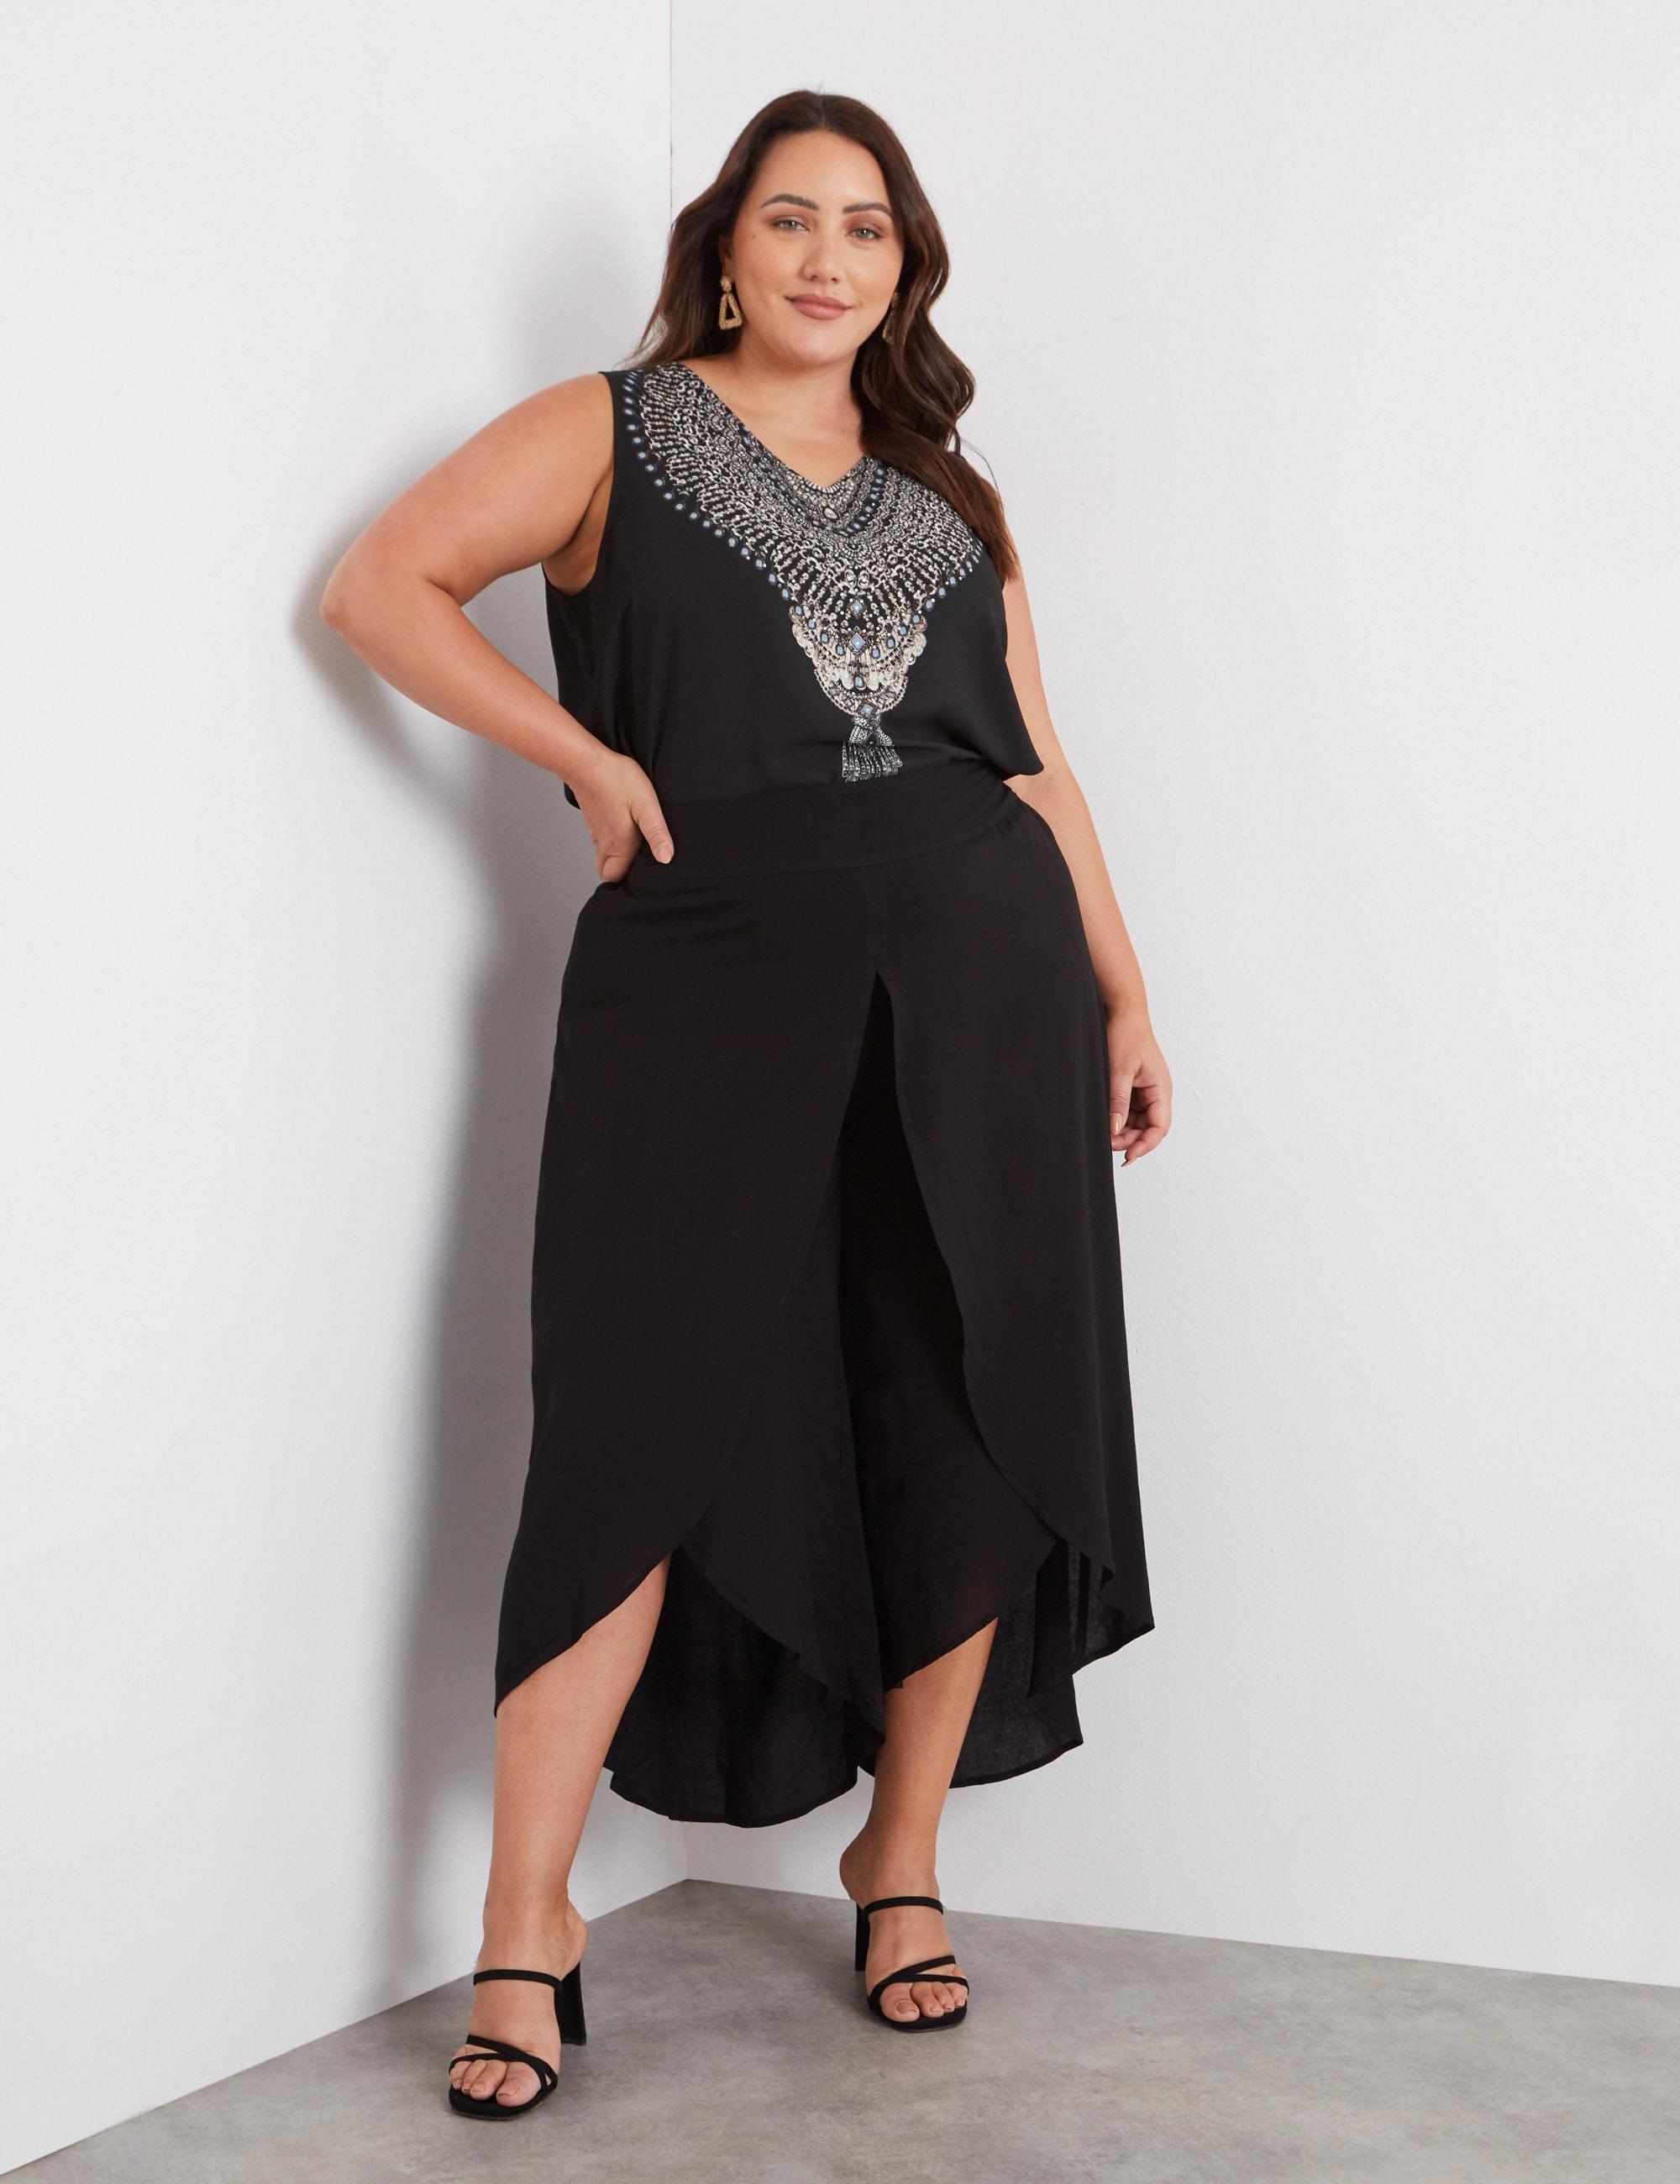 BeMe - Plus Size - Womens Pants - Black Summer Cropped Wide Leg Fashion Trousers - High Waist - Woven - Smart Casual - Work Clothes - Office Wear